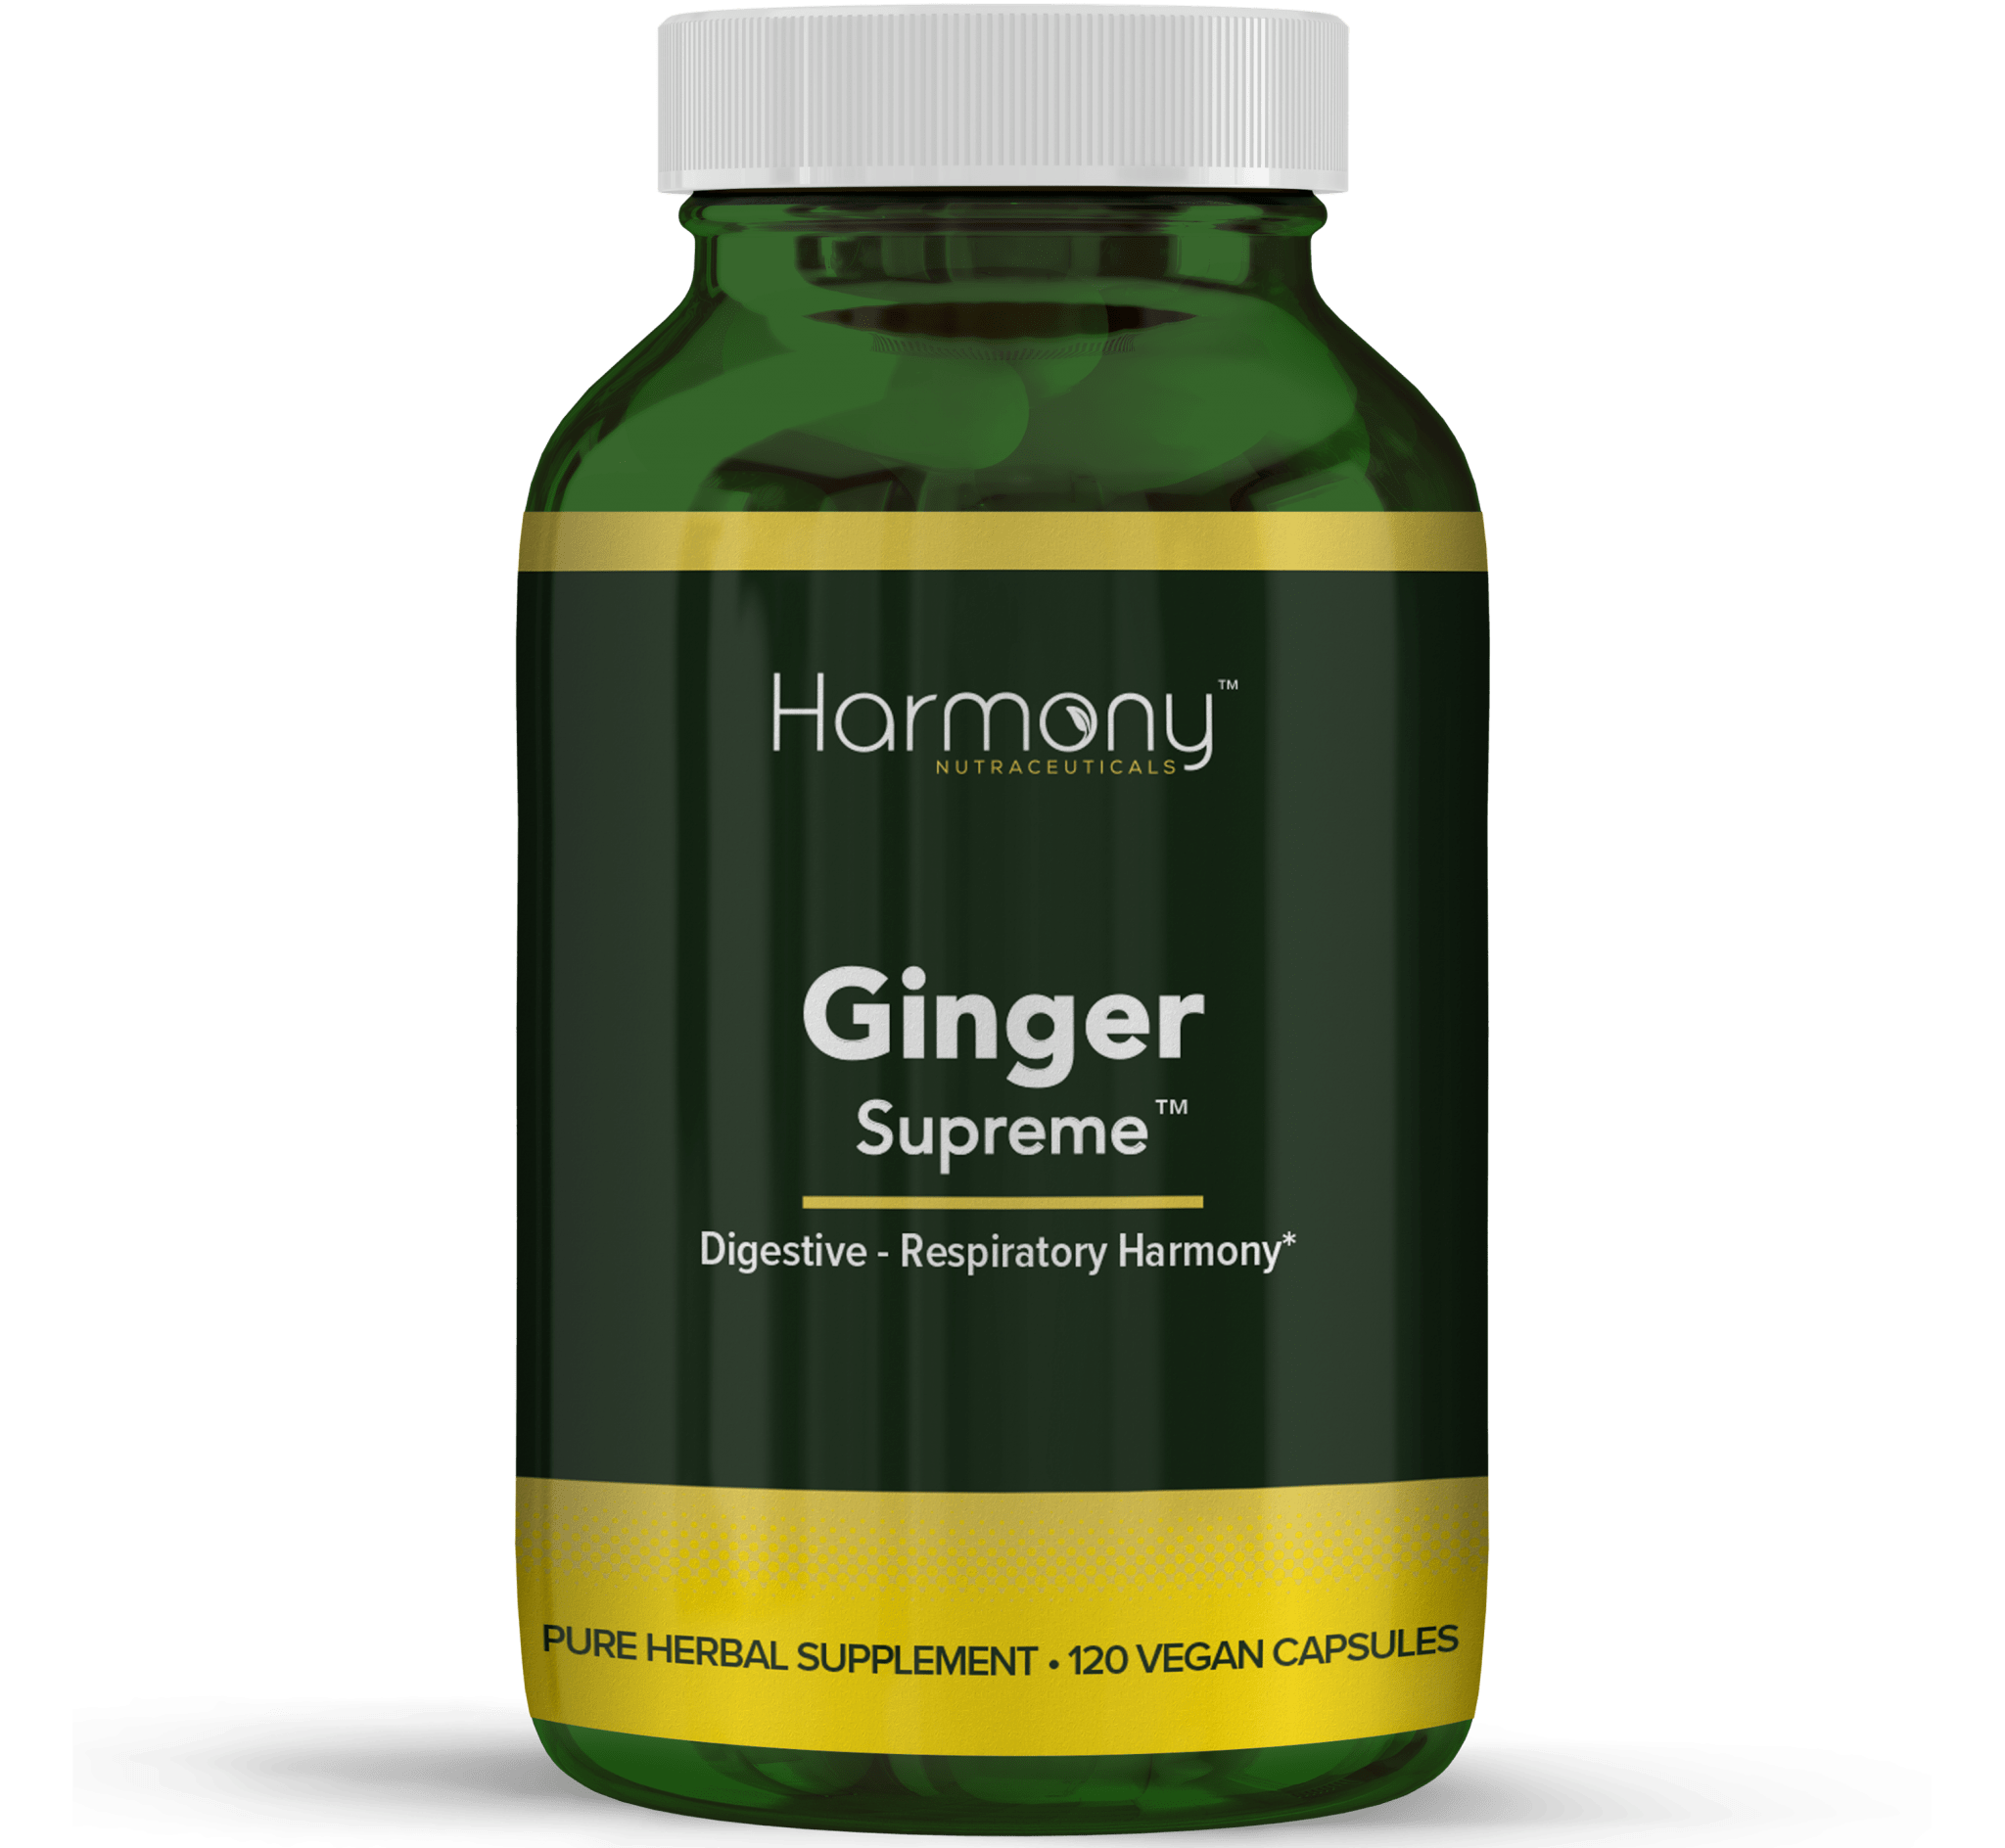 Ginger Supreme Pure Herbal Supplement- 120 Vegan Capsules from Harmony Veda,USA